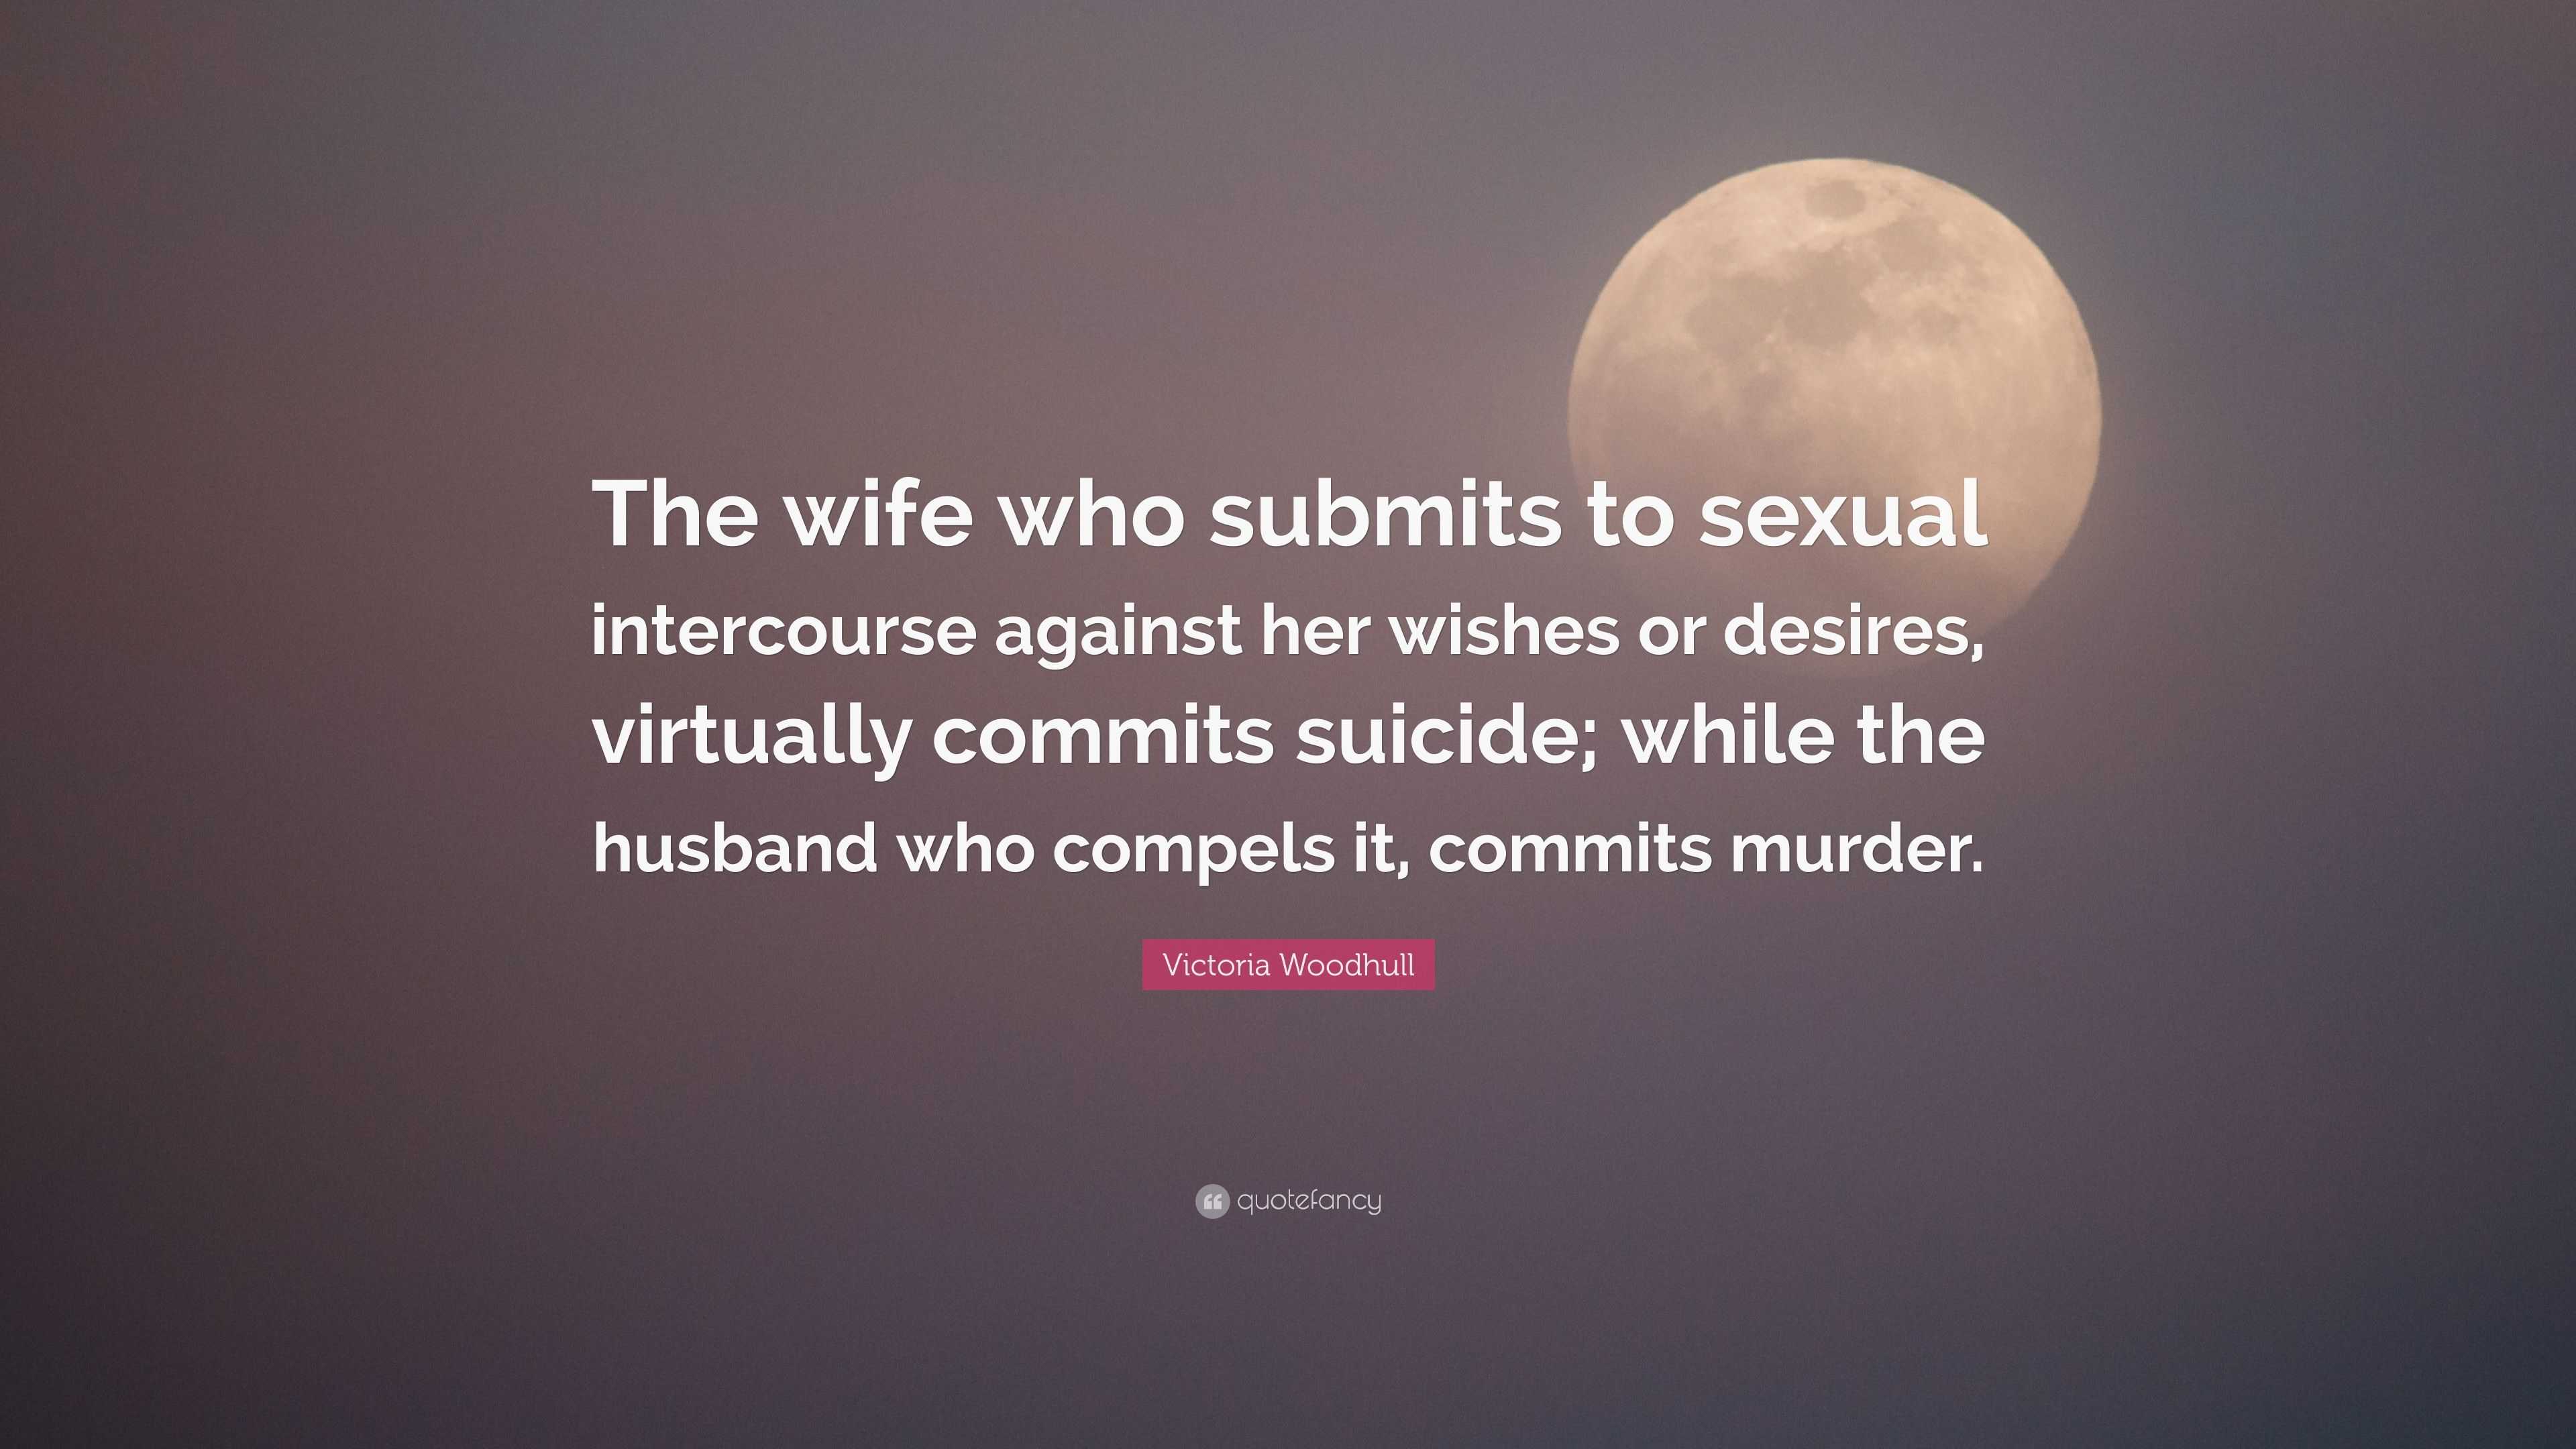 Victoria Woodhull Quote “The wife who submits to sexual intercourse against her wishes or desires, virtually commits suicide; while the husband w...”